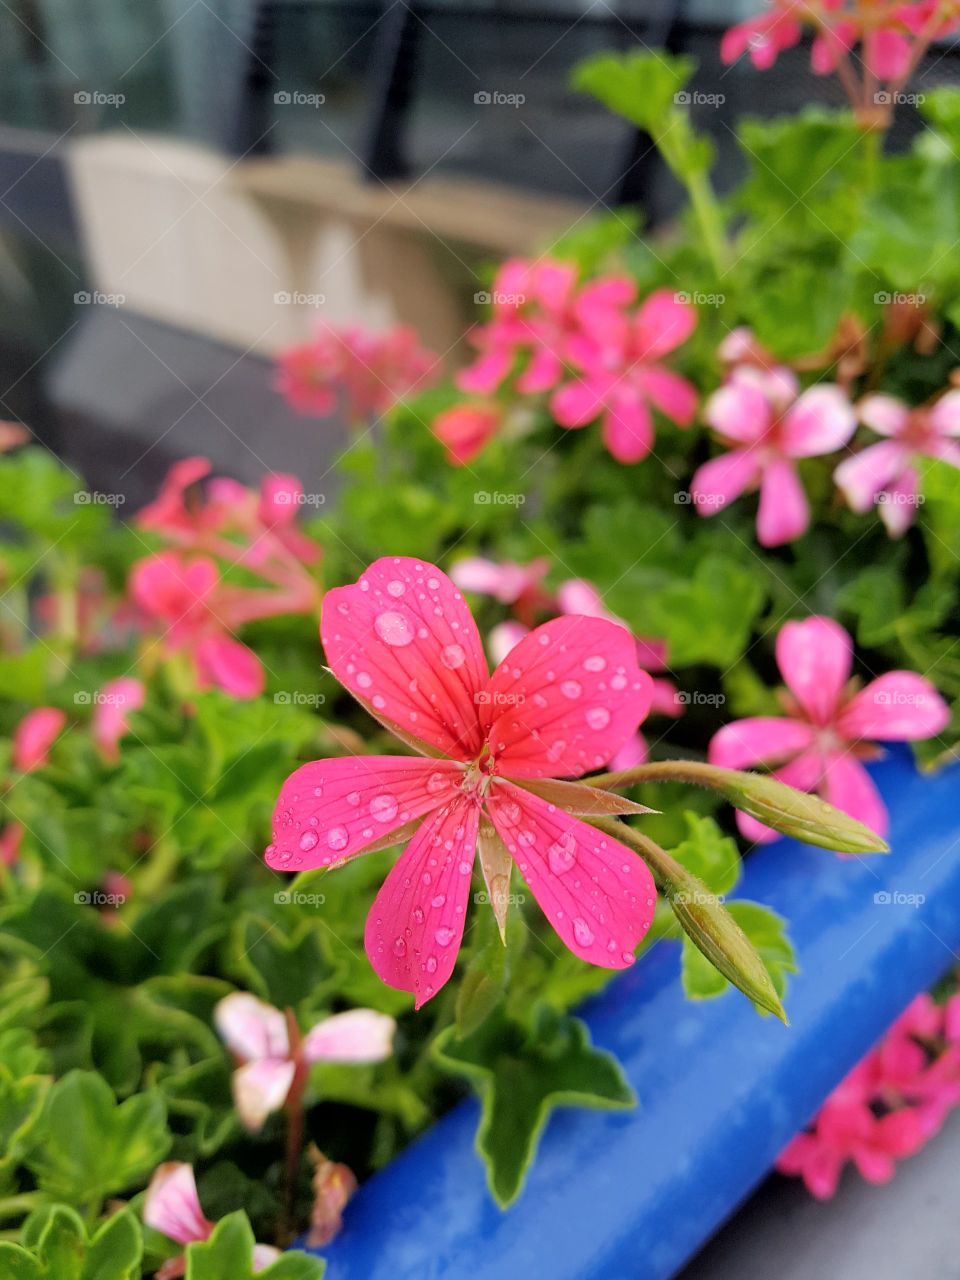 nice pink flower in a rainy day